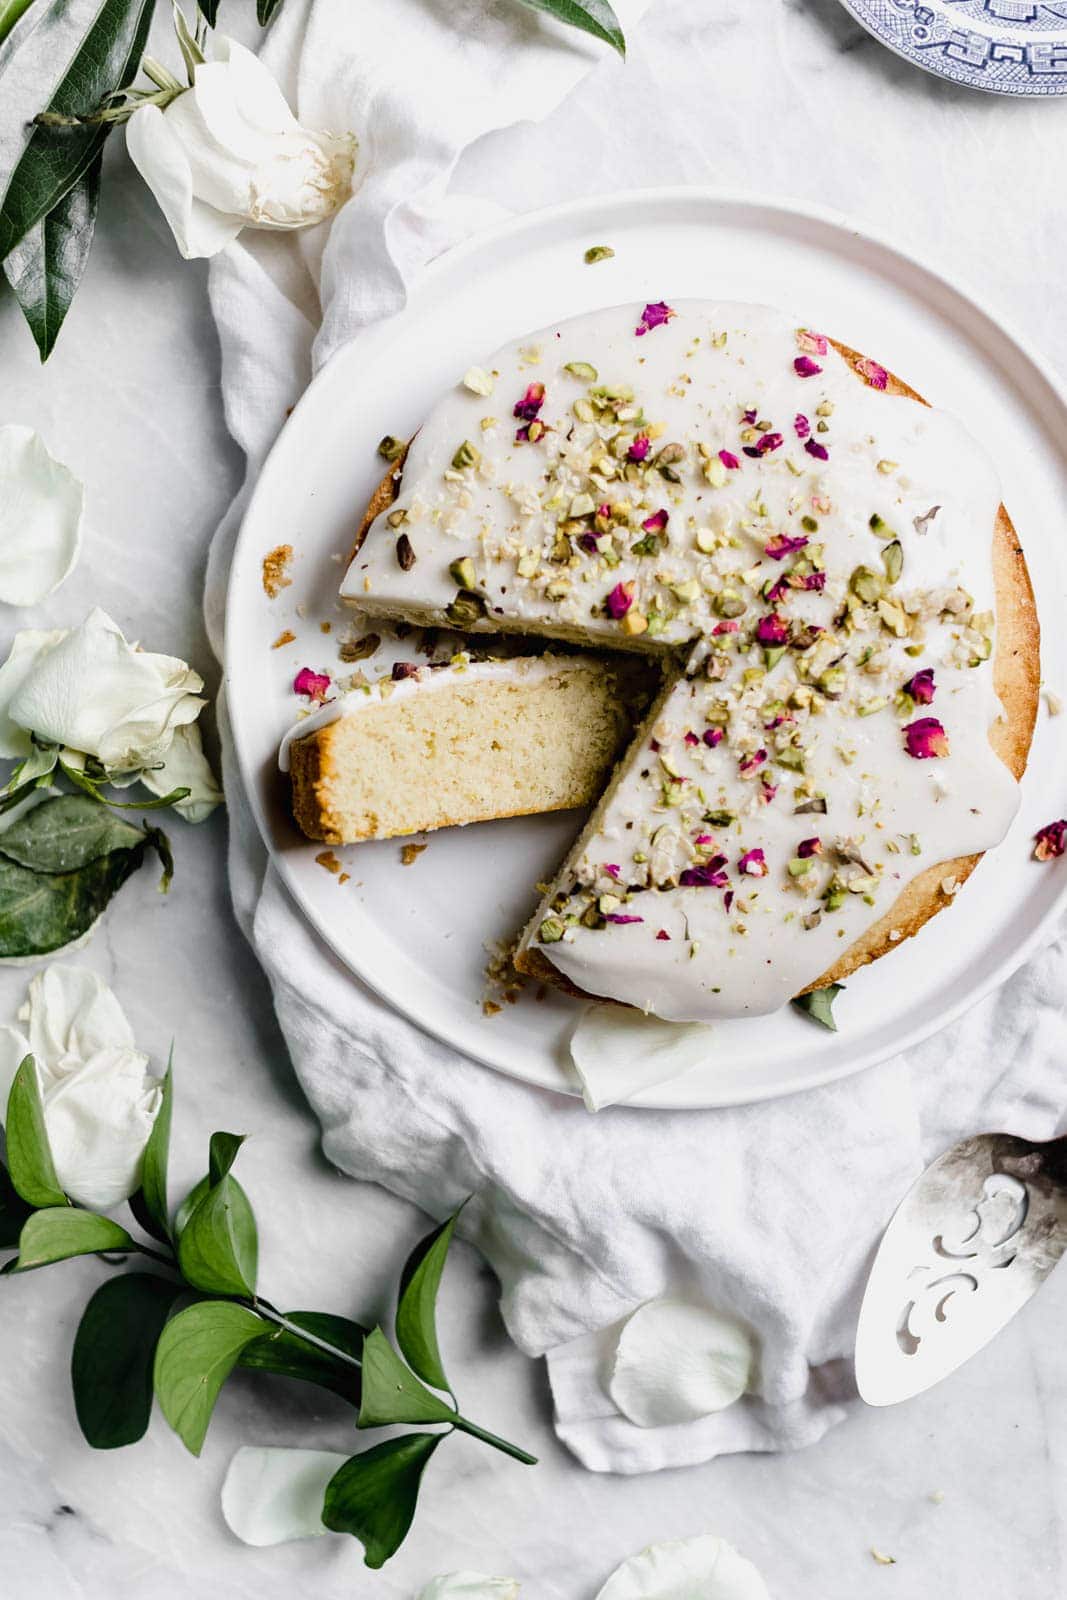 Persian Love Cake: a fragrant cake flavored with freshly ground cardamom, rose water, and almond flour, and topped with crushed pistachios and rose petals.